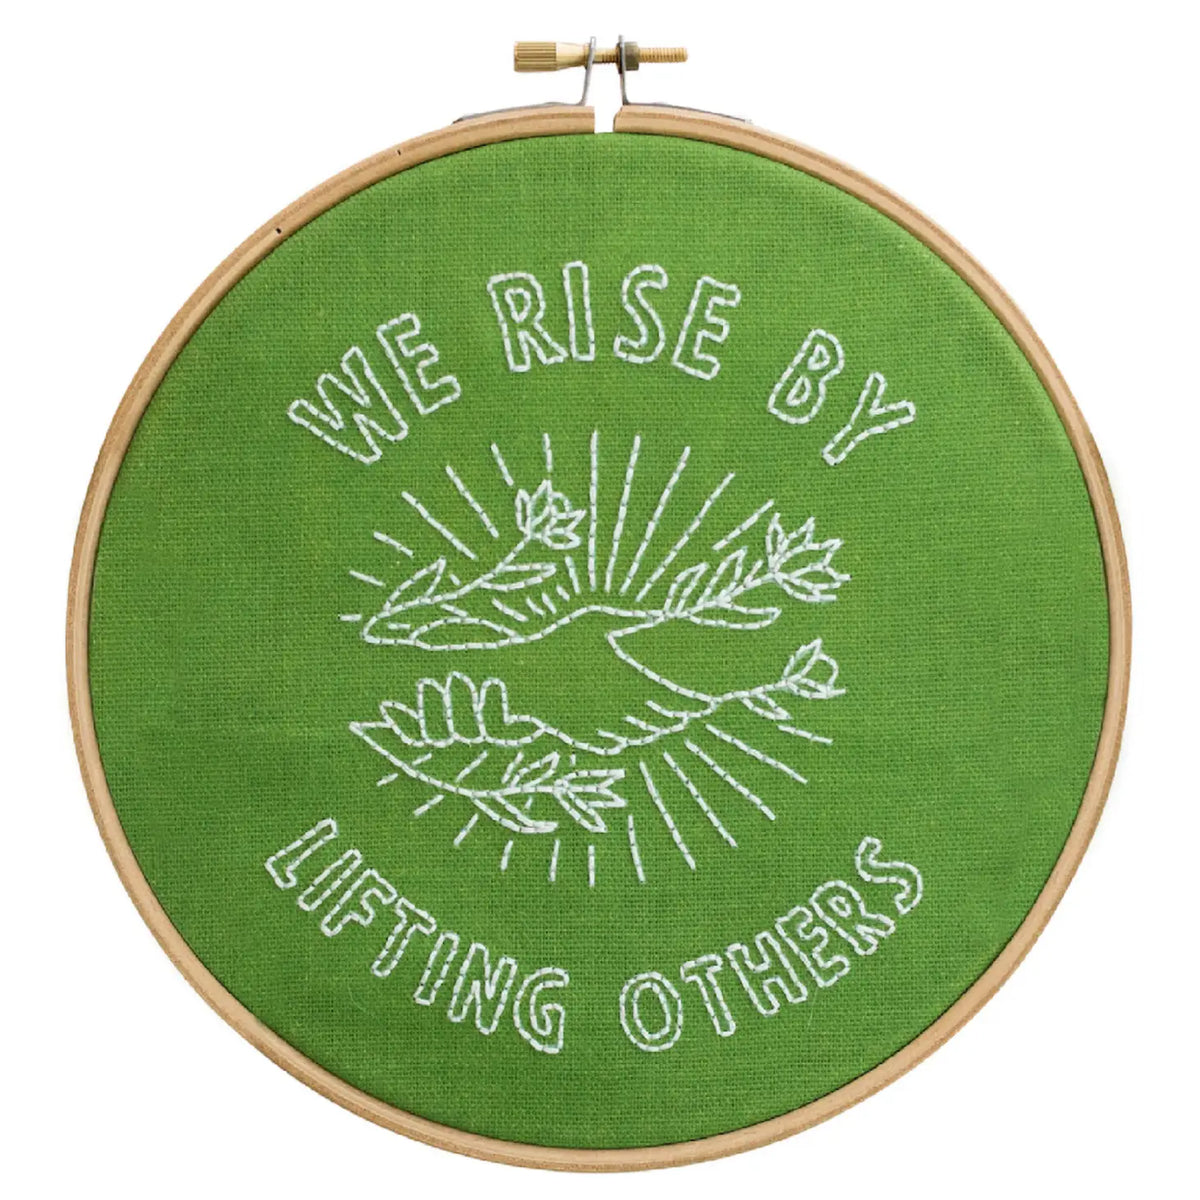 We Rise By Lifting Others Embroidery Kit in Green